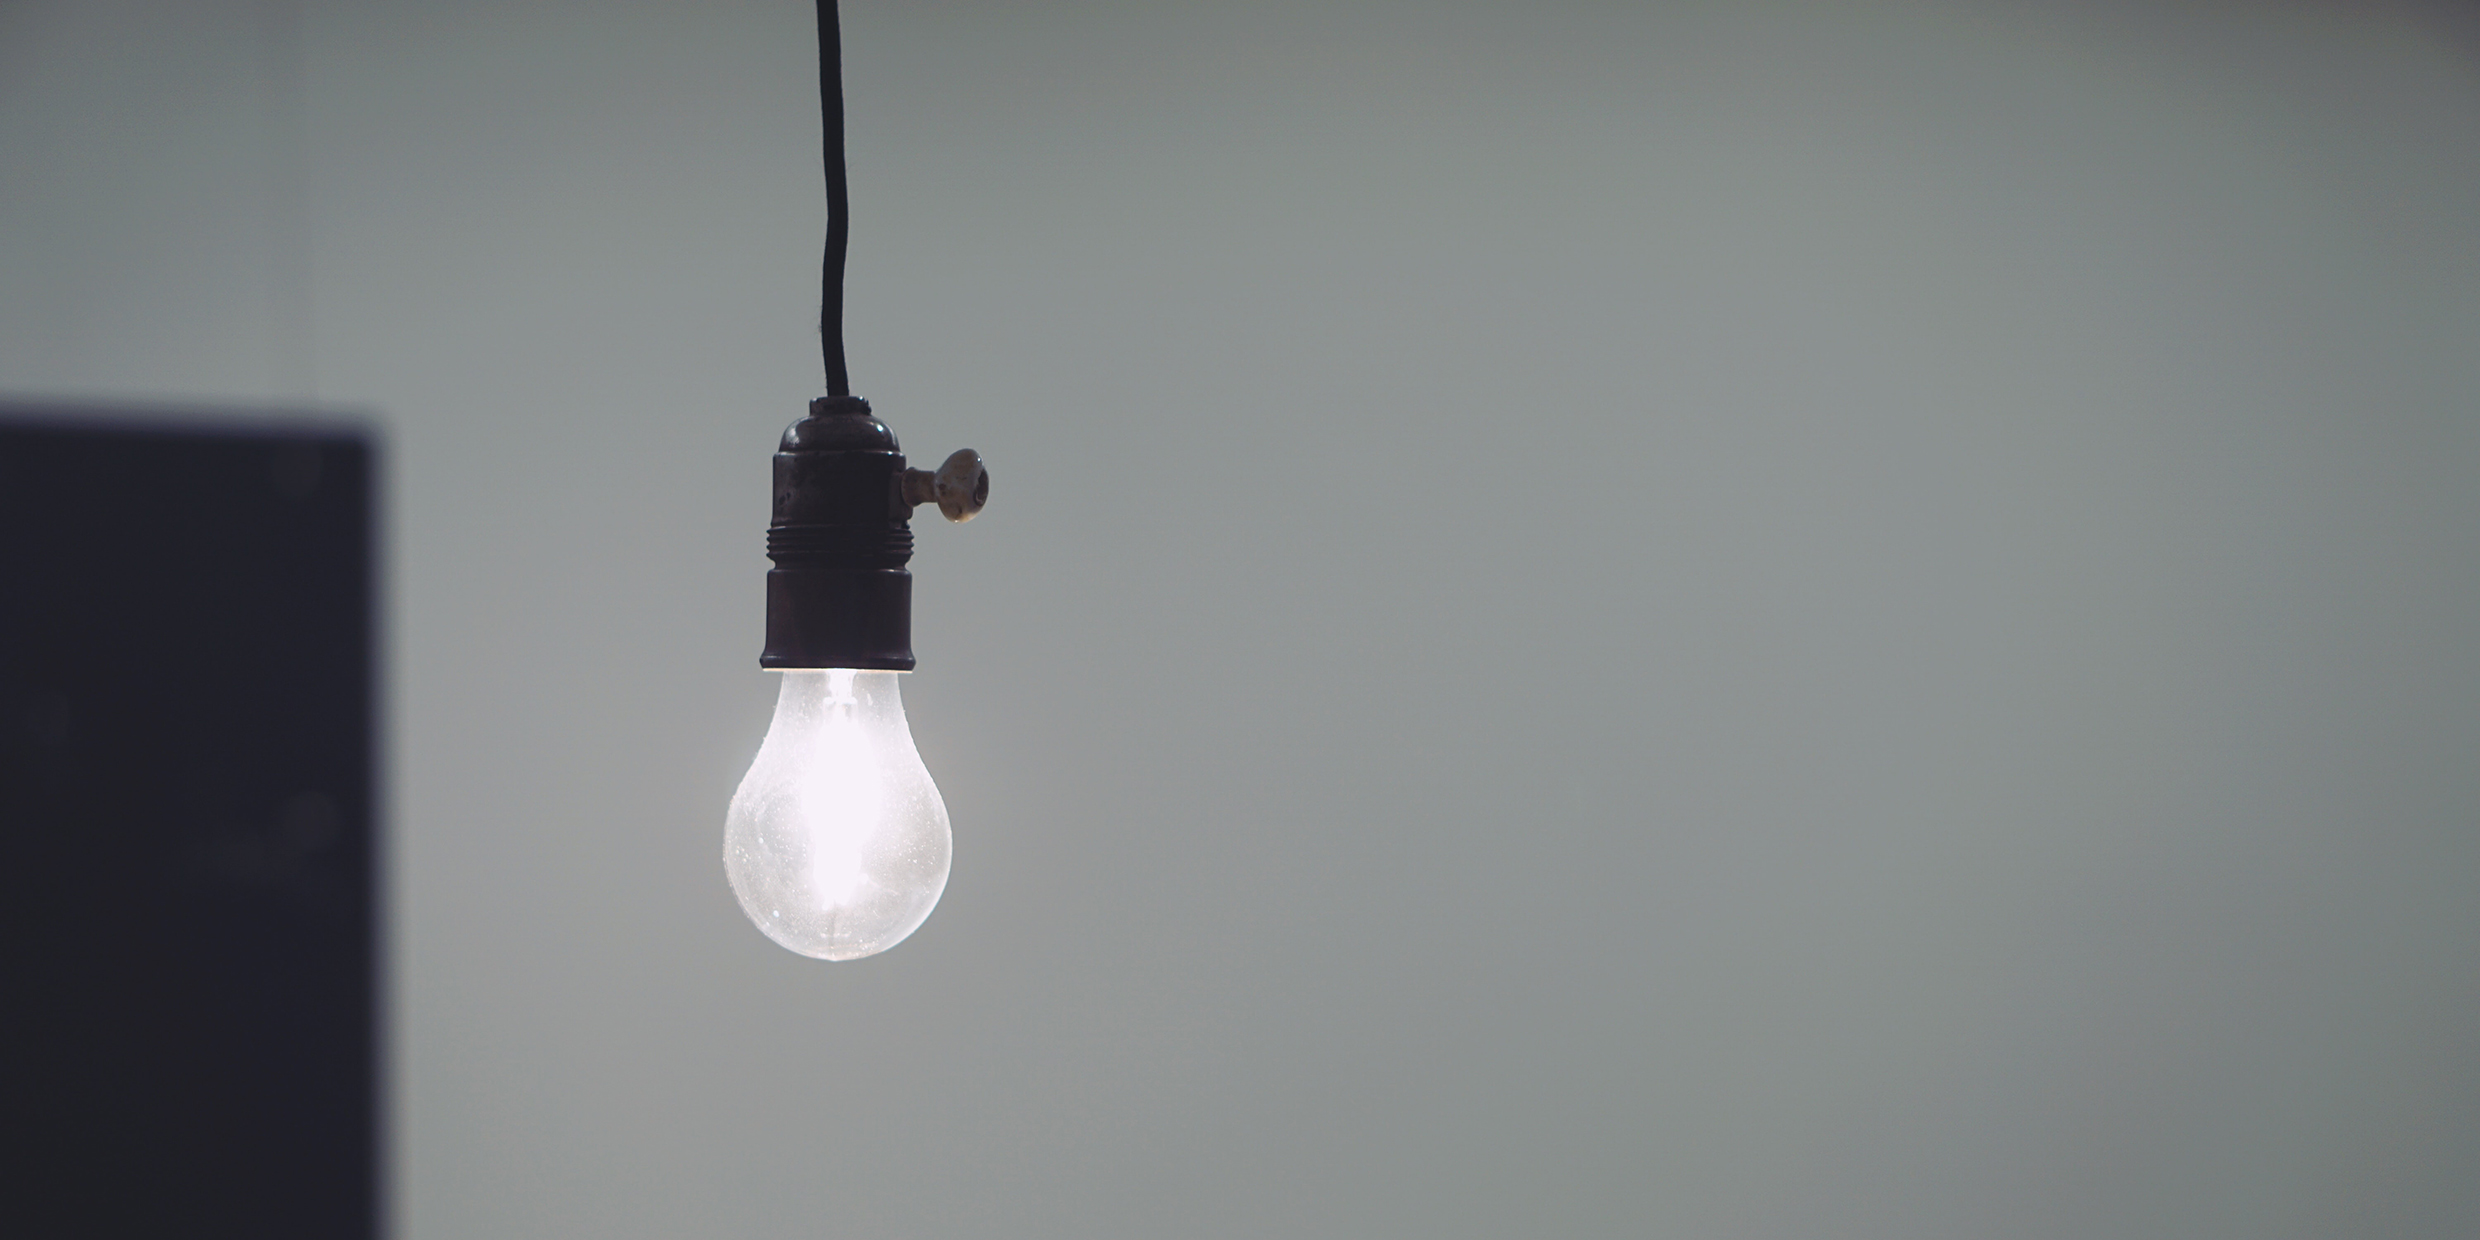 Image of single lit lightbulb hanging in front of white background